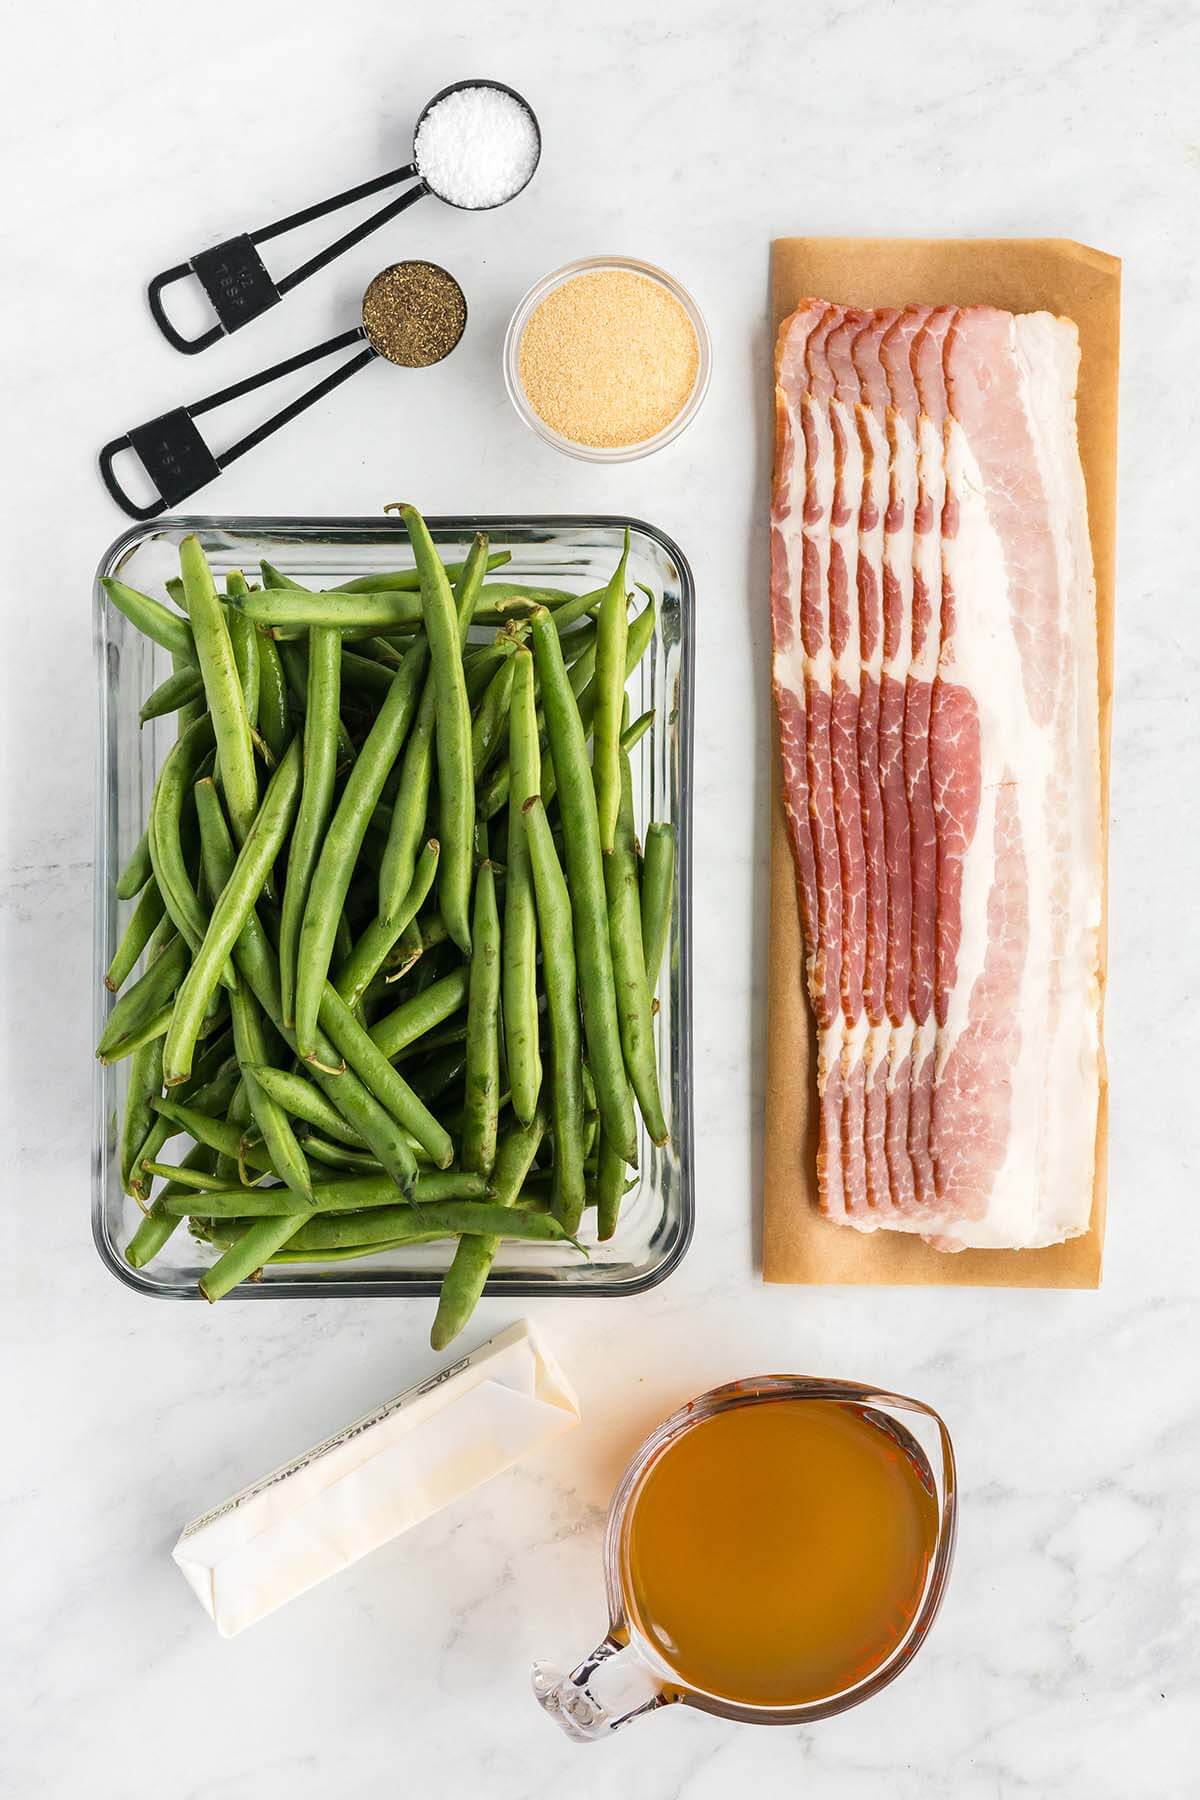 Ingredients for cooking arranged on a kitchen counter, including fresh green beans, bacon strips, seasonings, butter, and broth.